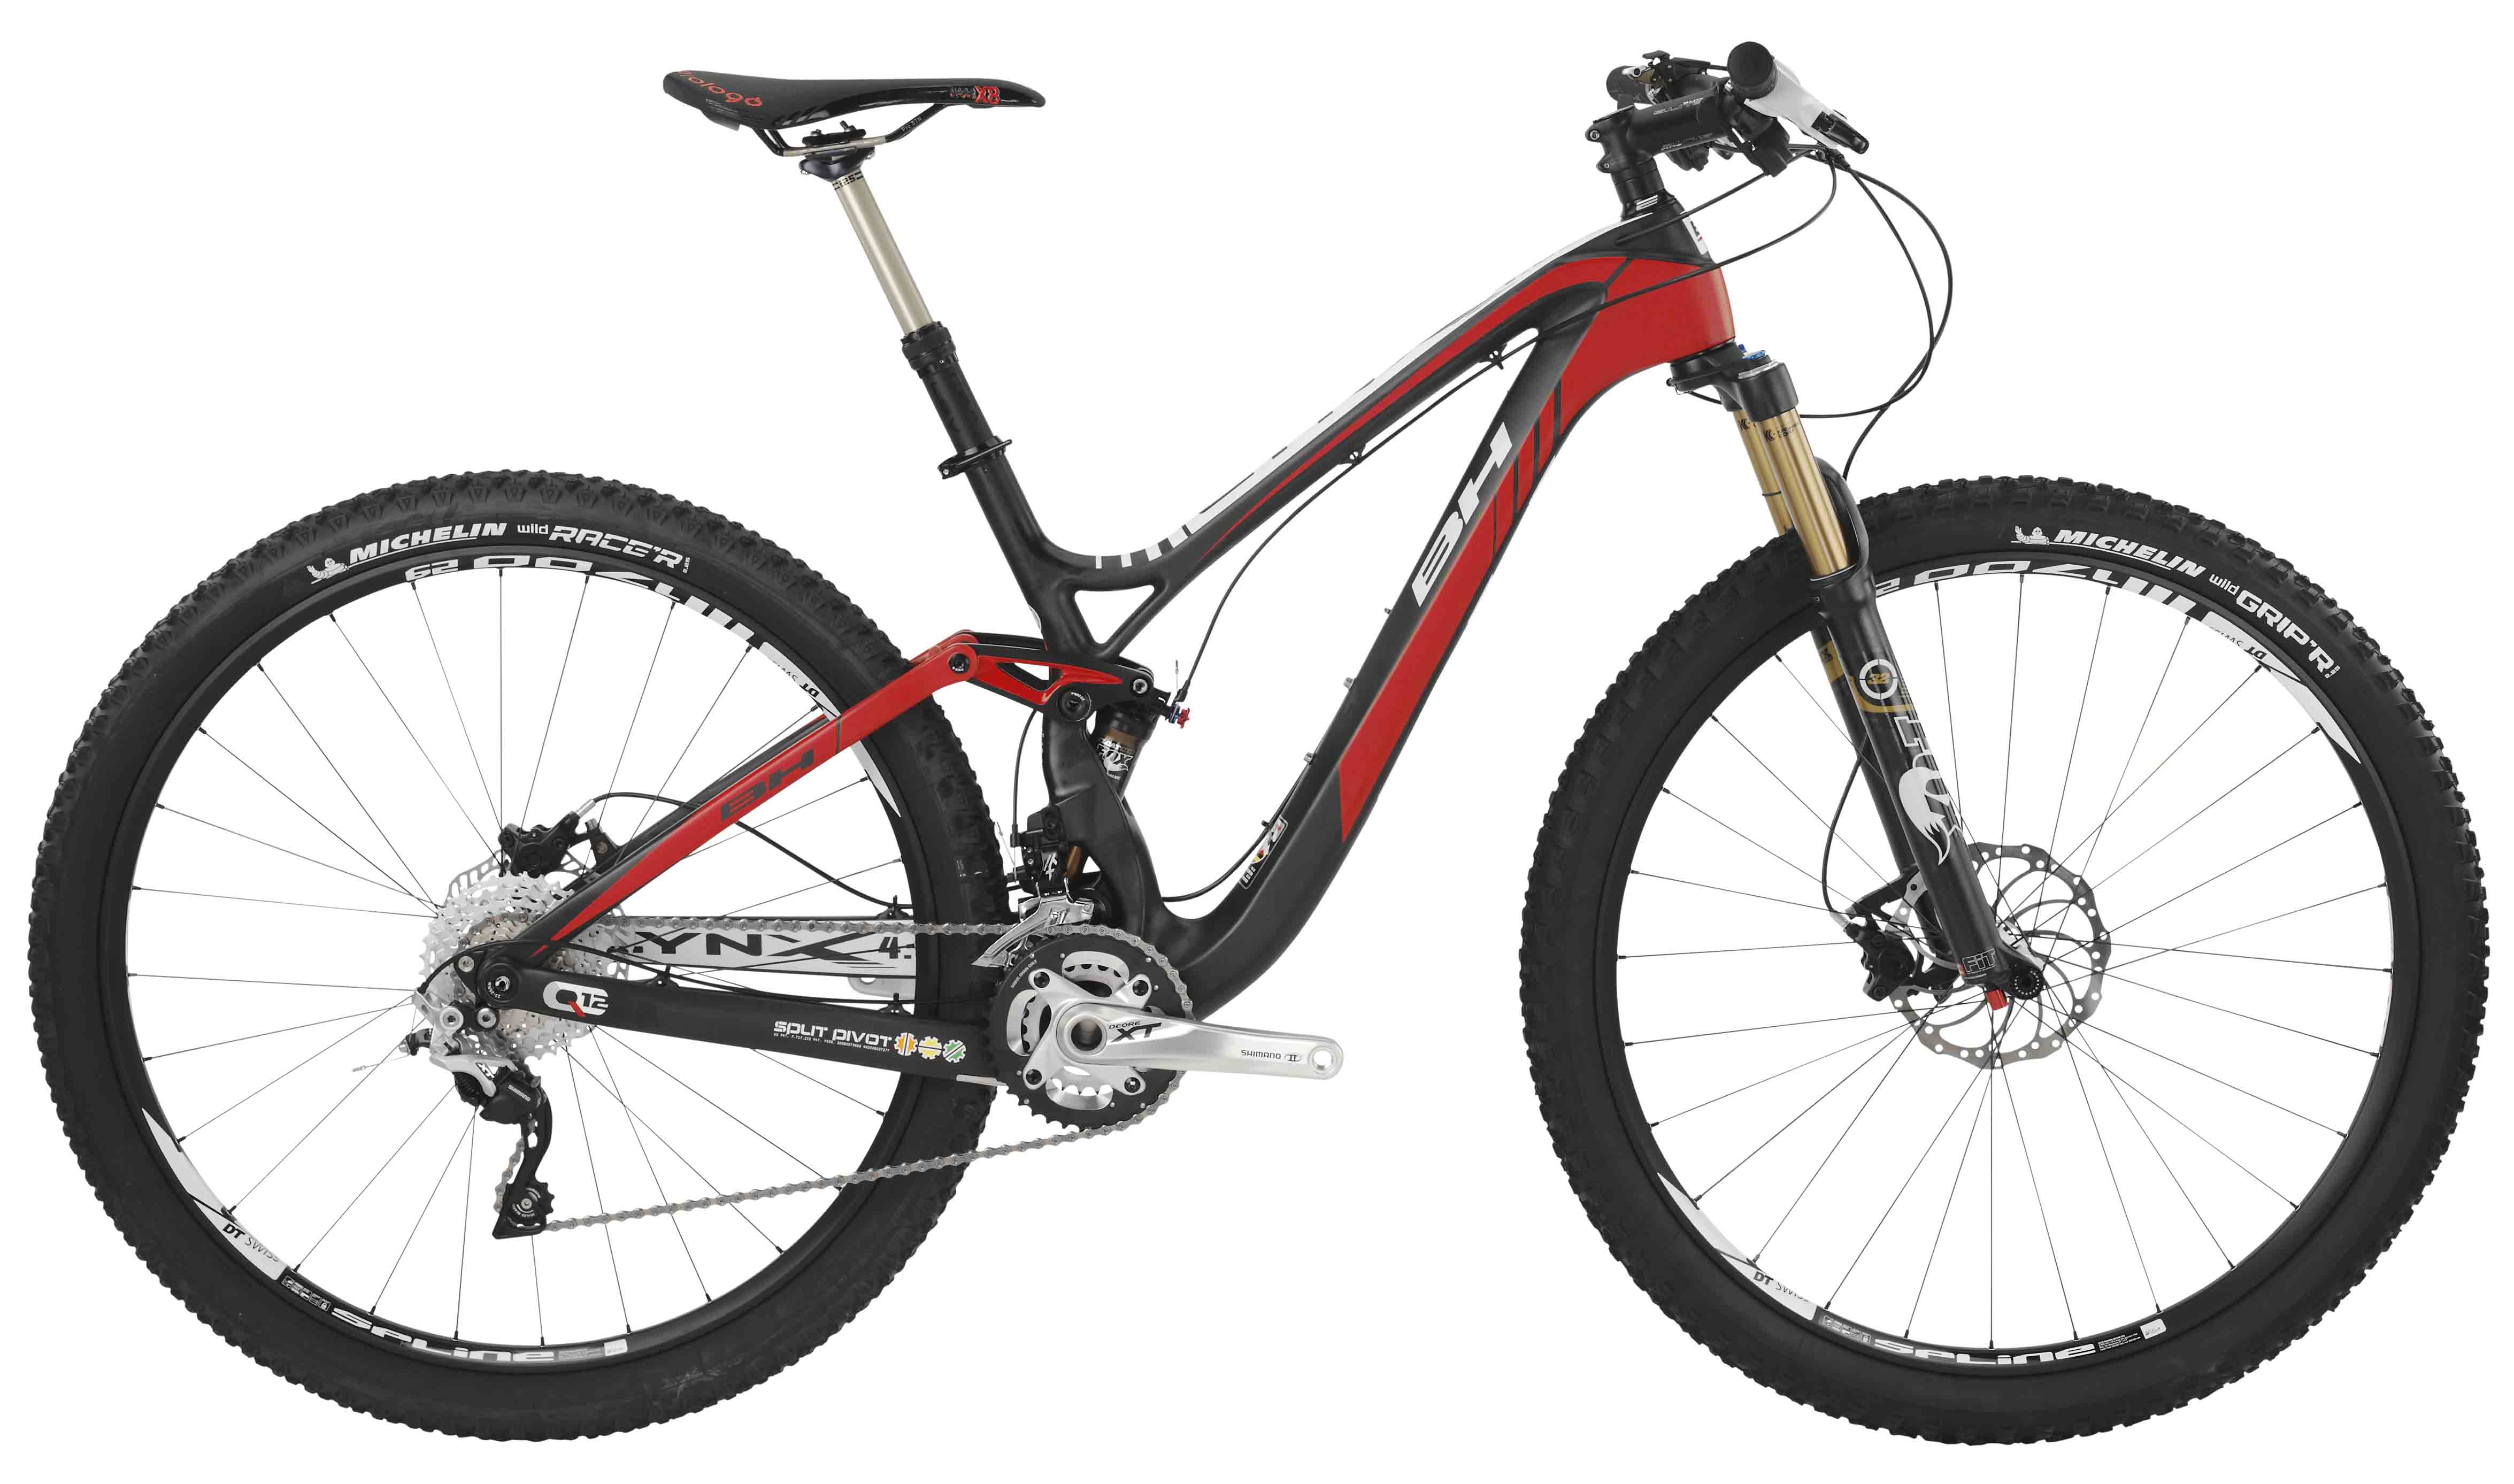 New 2015 Lynx from BH, highly evolved and at a very special price 